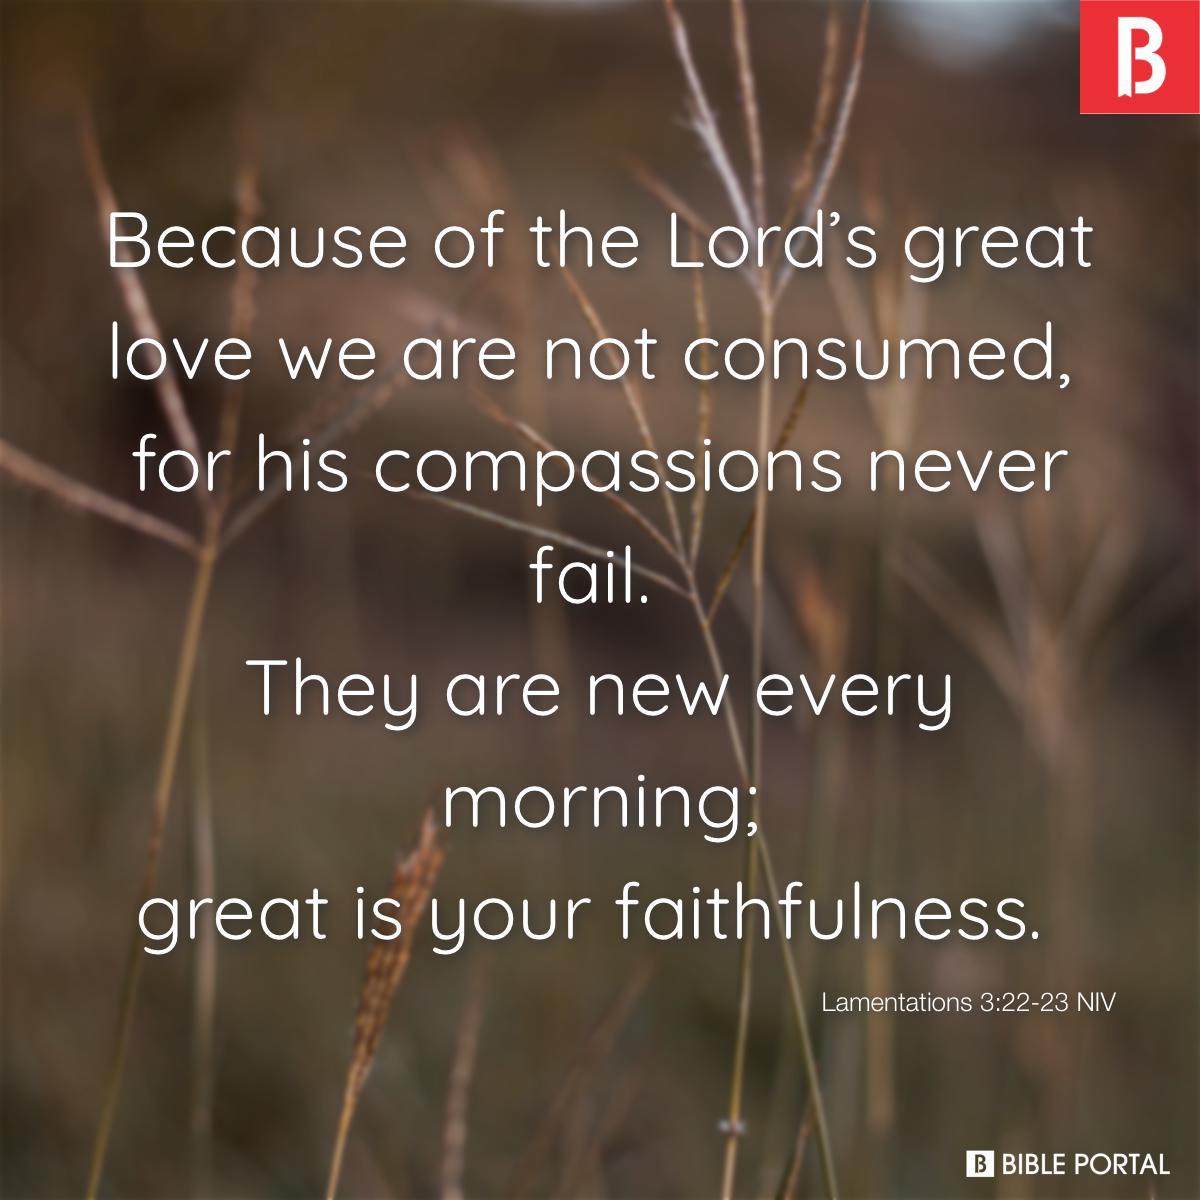 Bible verse of the day - May 26, 2022 - Lamentations 3:22-23